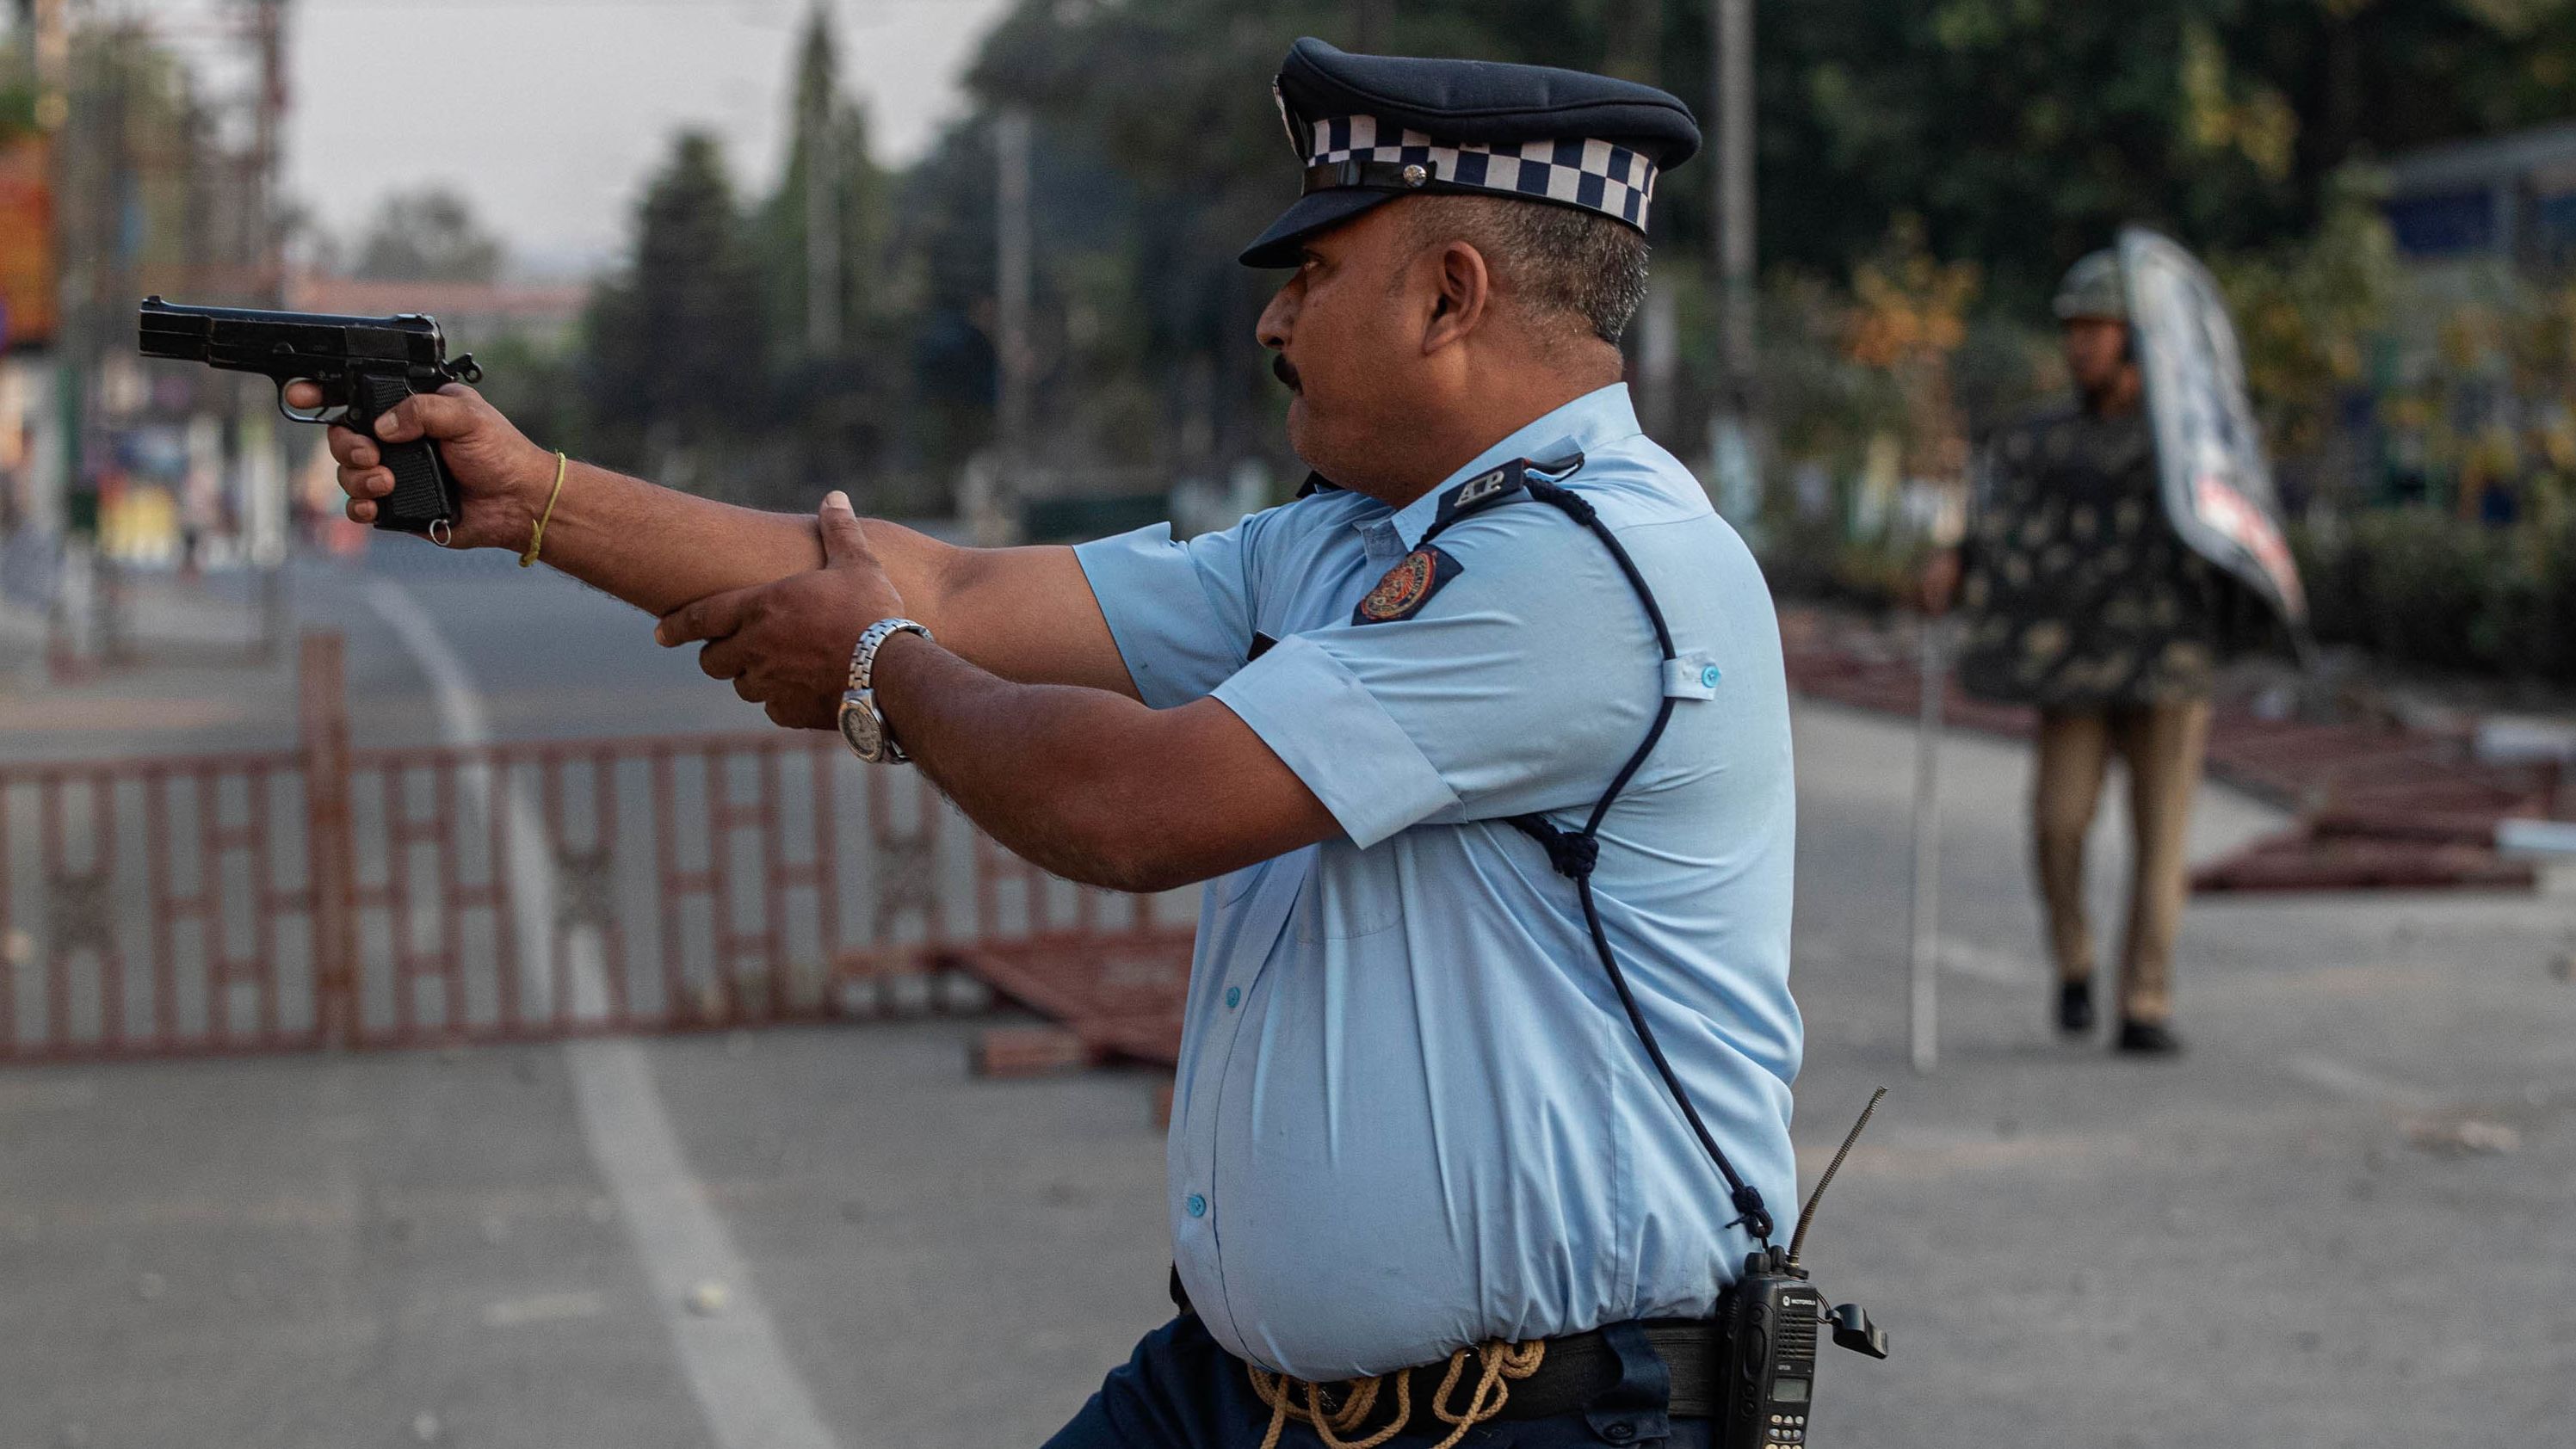 An Indian police officer aims his gun before firing toward protesters who threw stones in Guwahati on December 12.